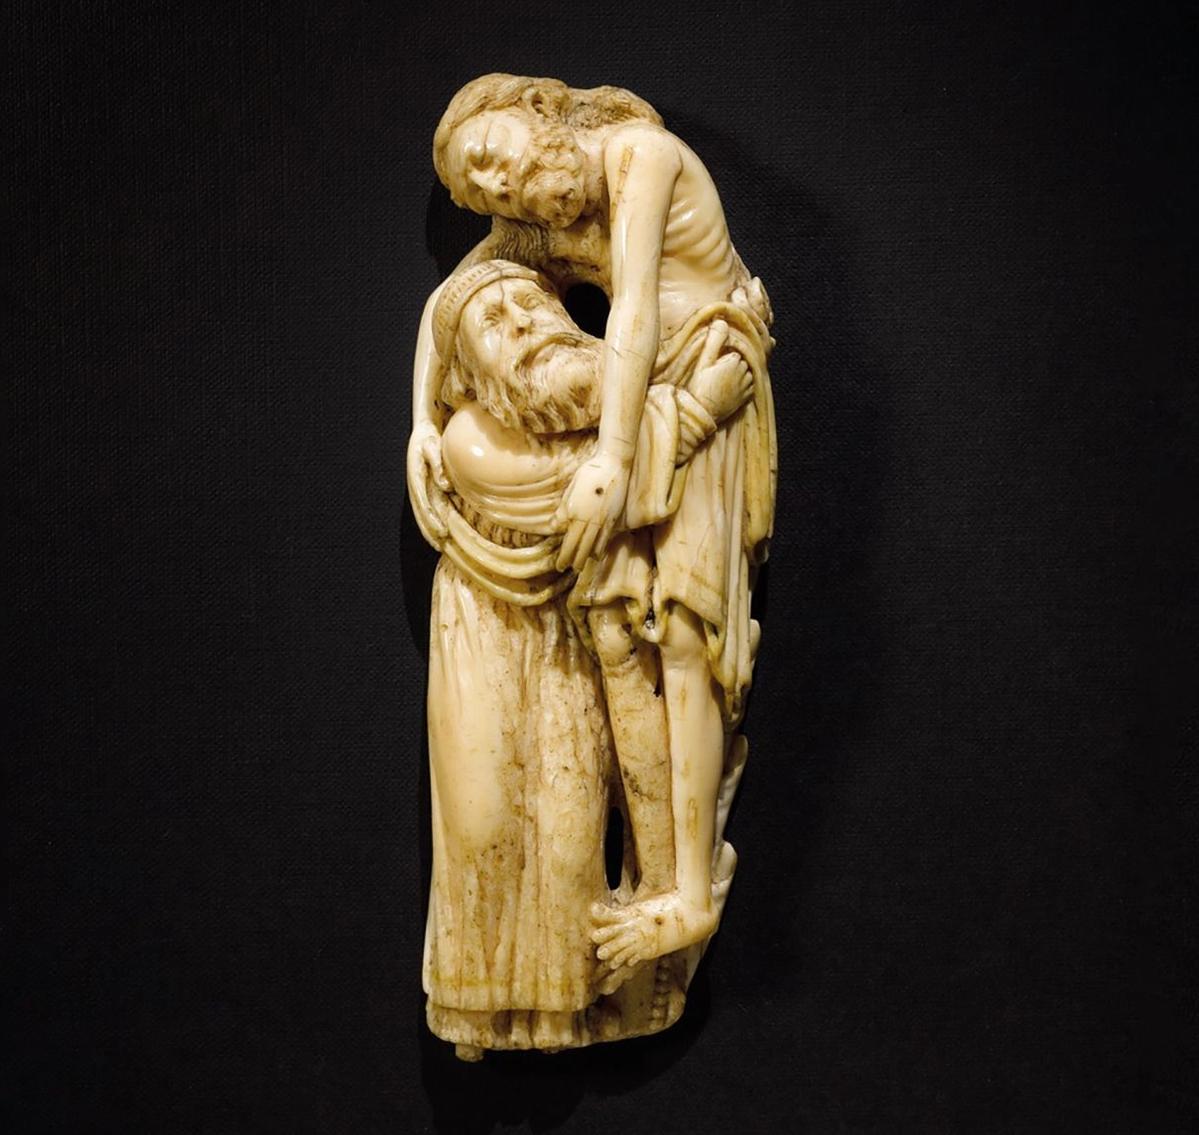 Deposition from the Cross (around 1190-1200) will go on display at the V&A in September

Photo: © Department for Culture, Media and Sport